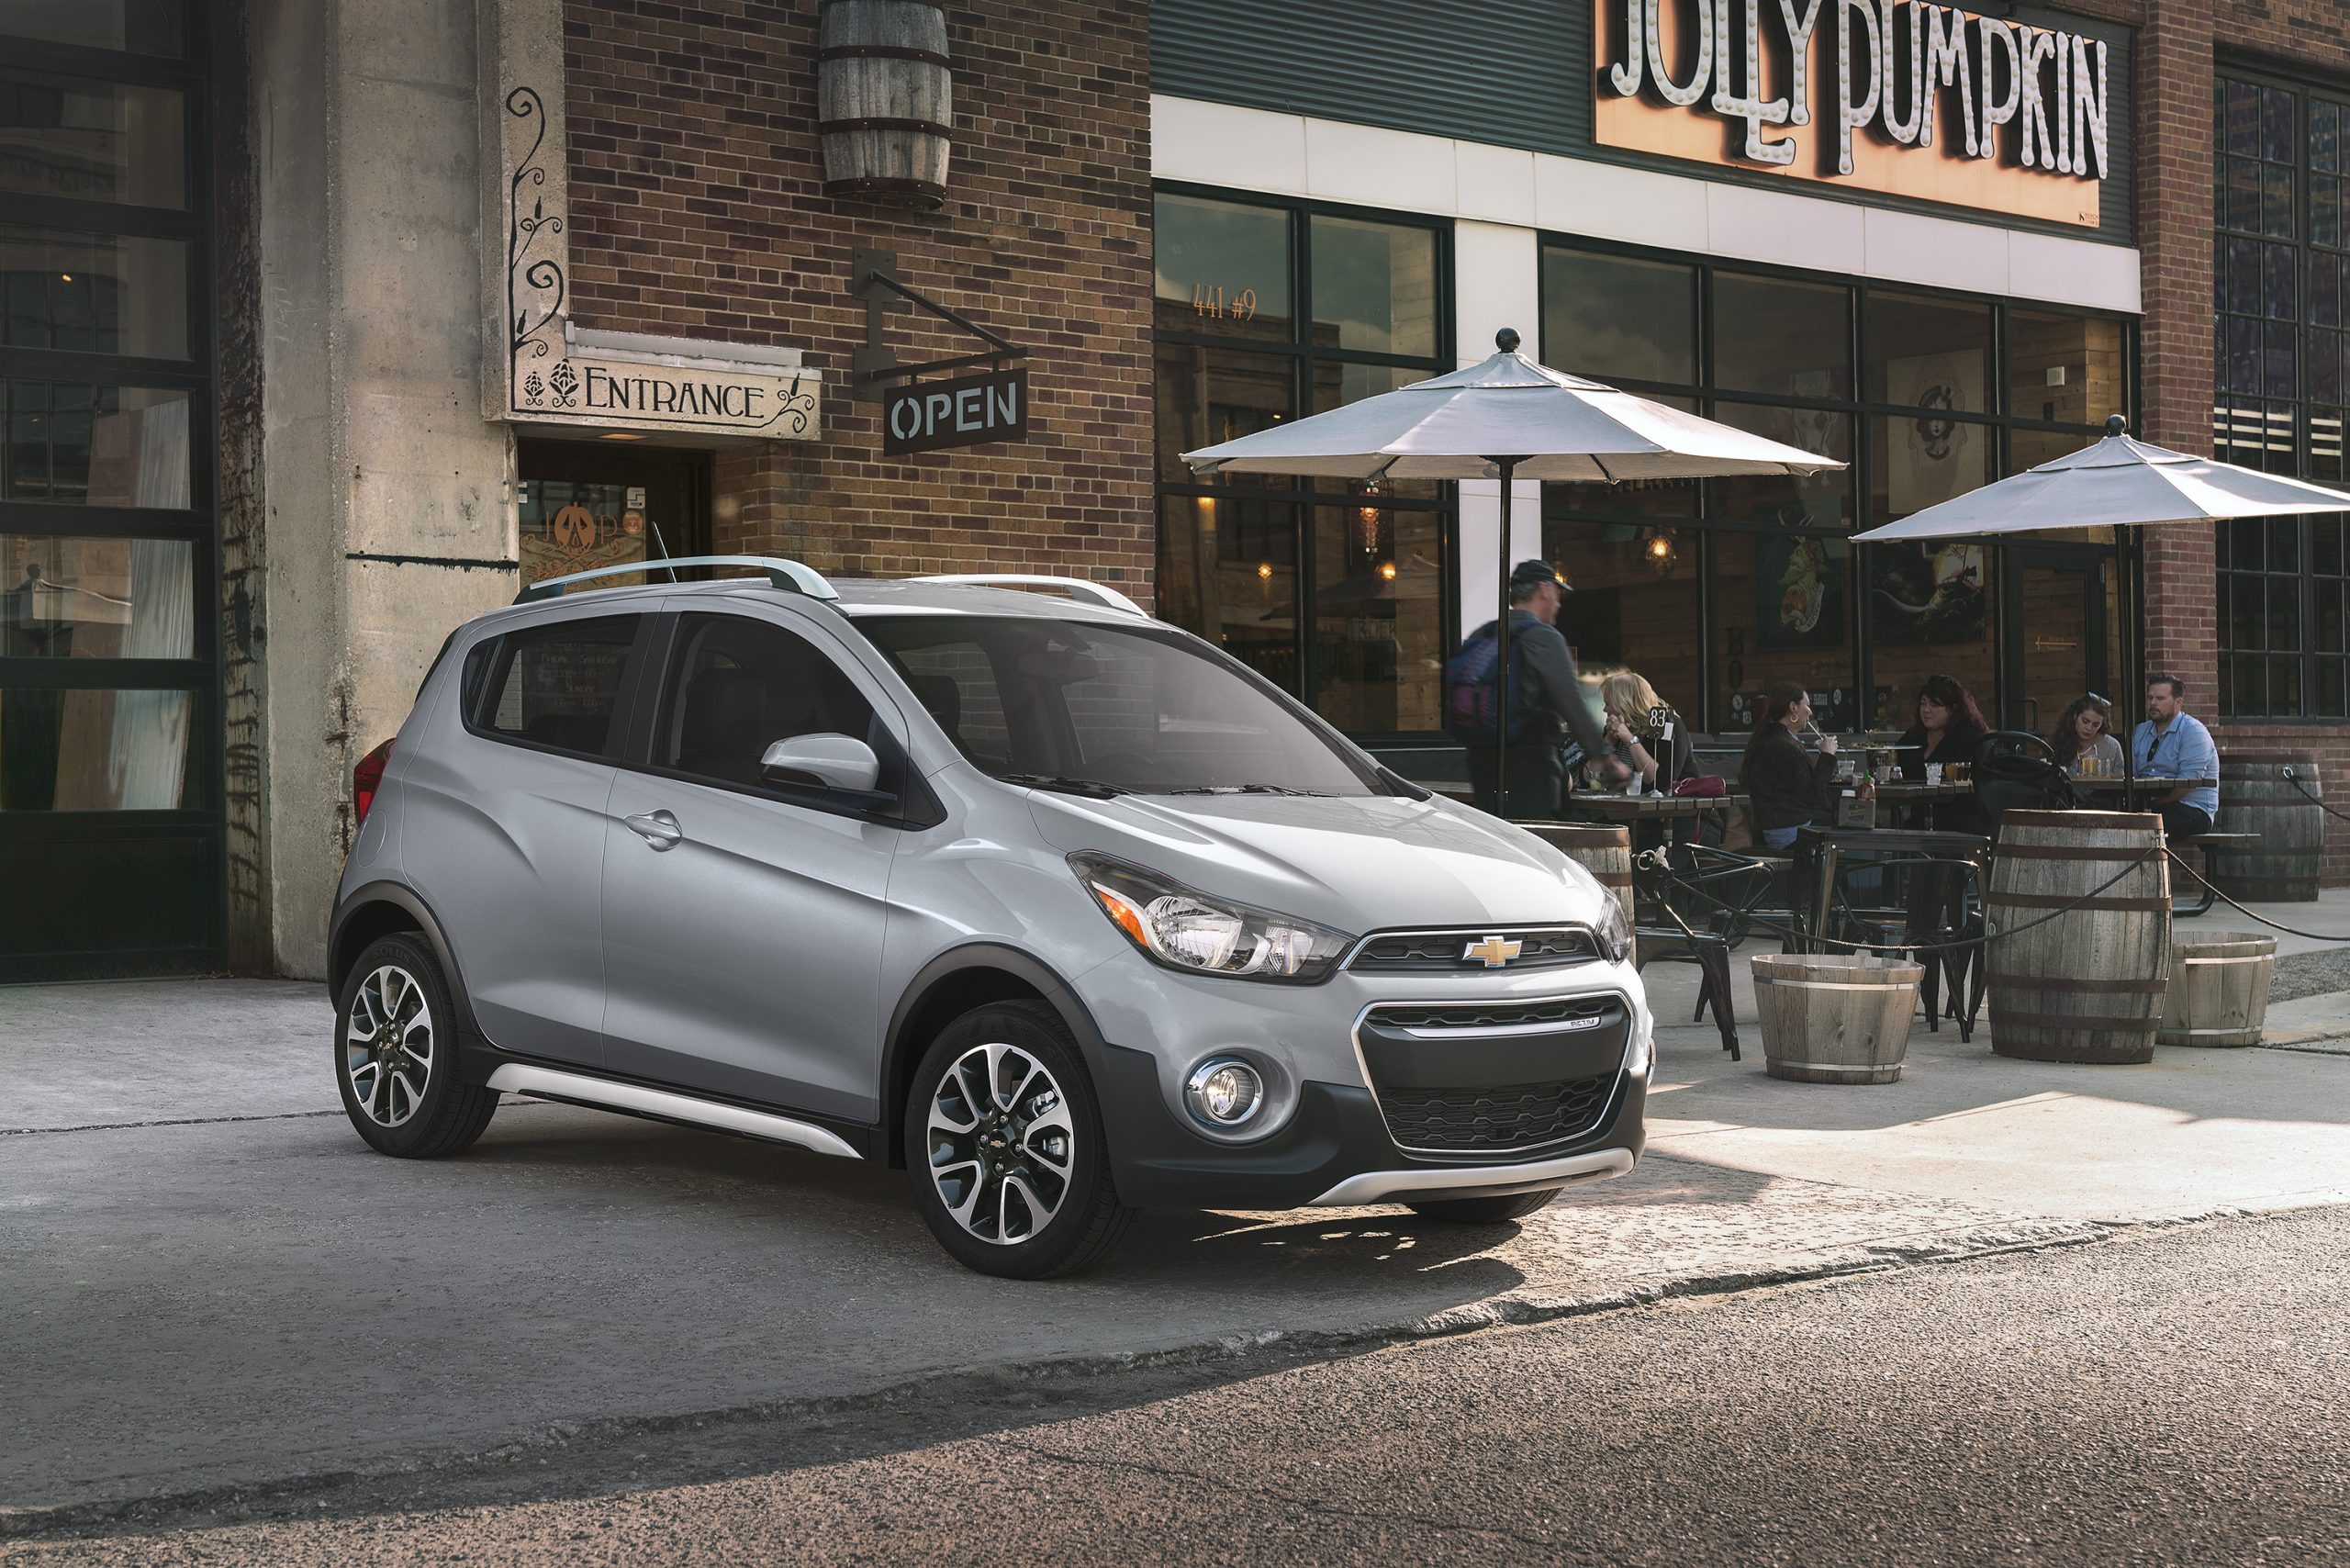 A silver Chevy Spark, one of the worst new car deals, shot from the front 3/4